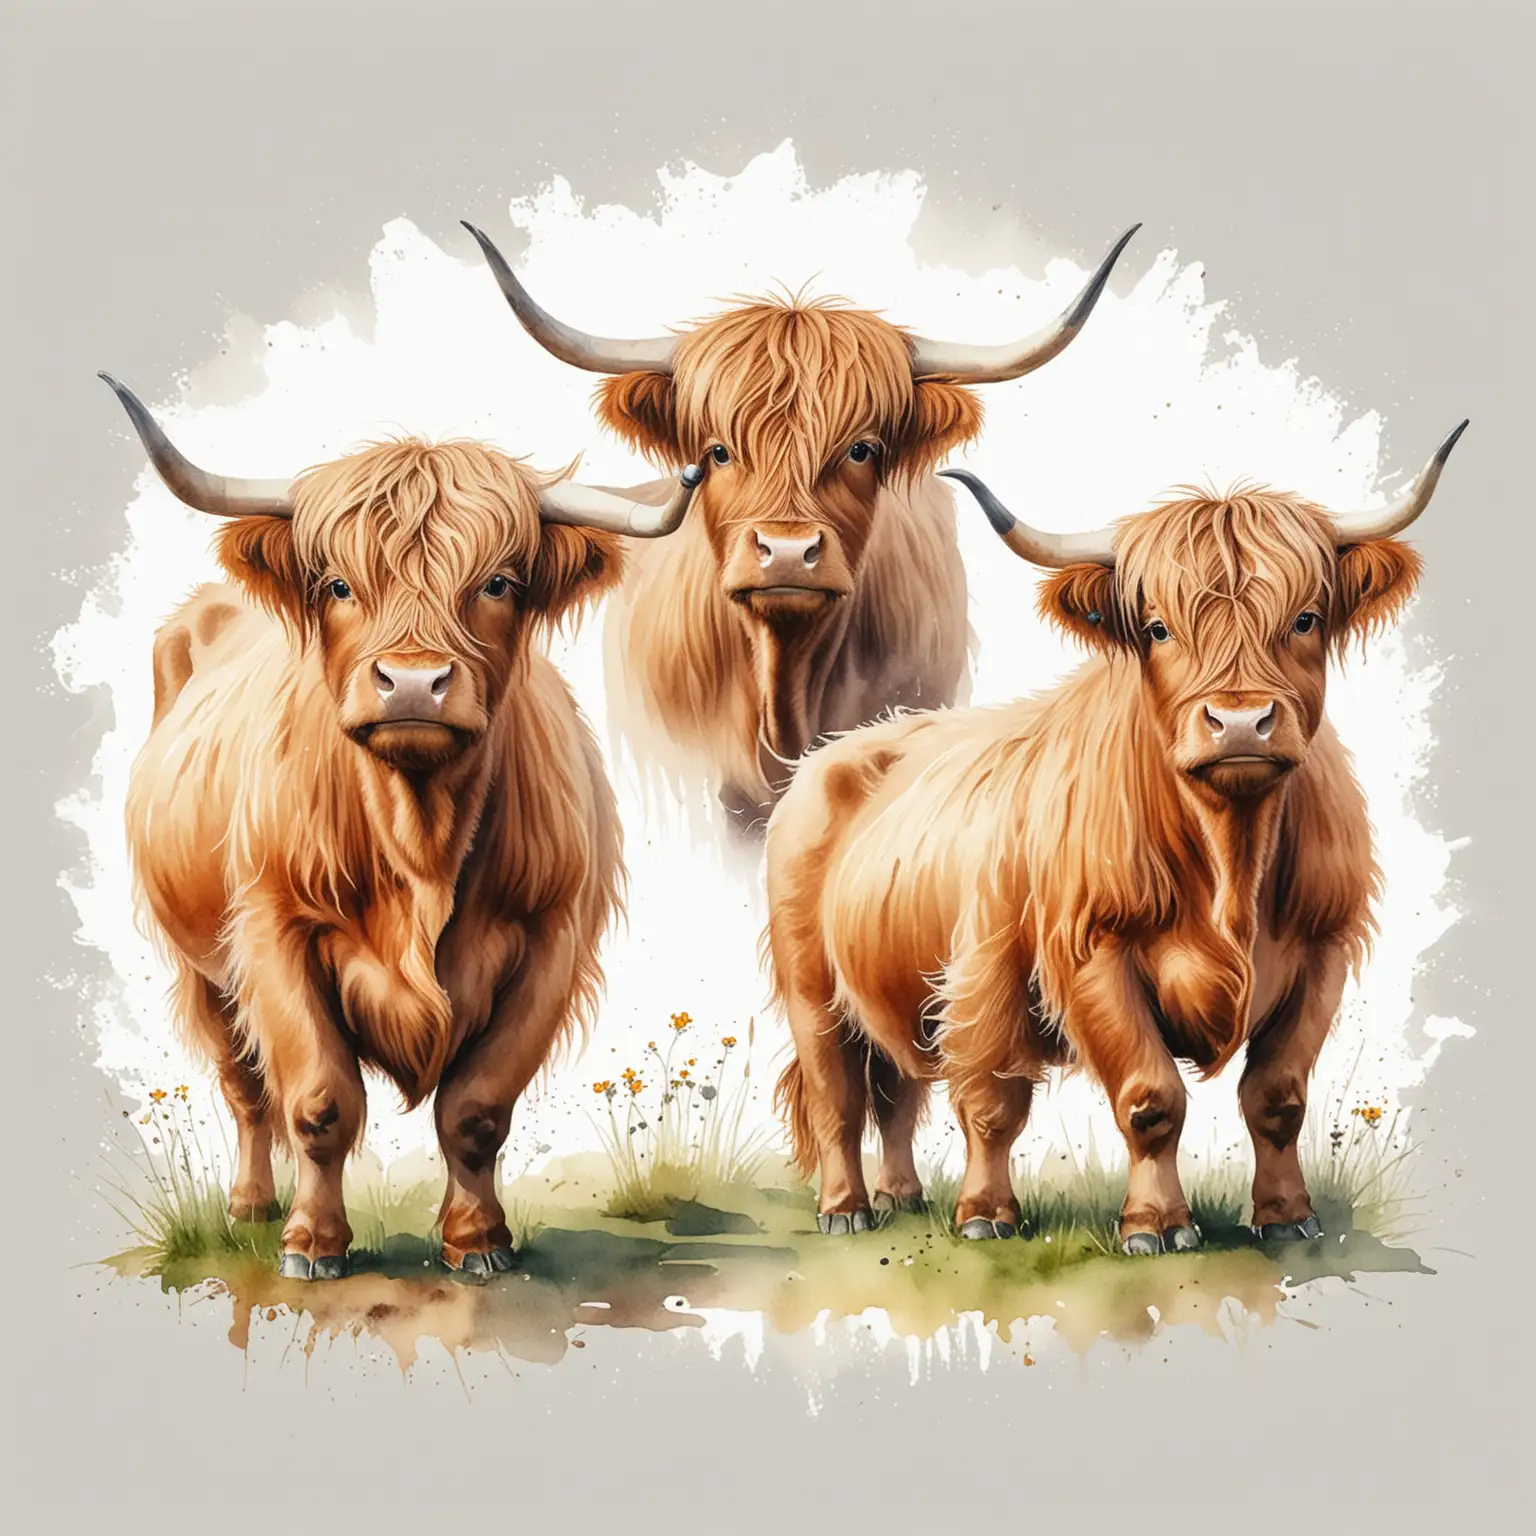 Adorable Highland Cows Watercolor Illustration for Clip Art